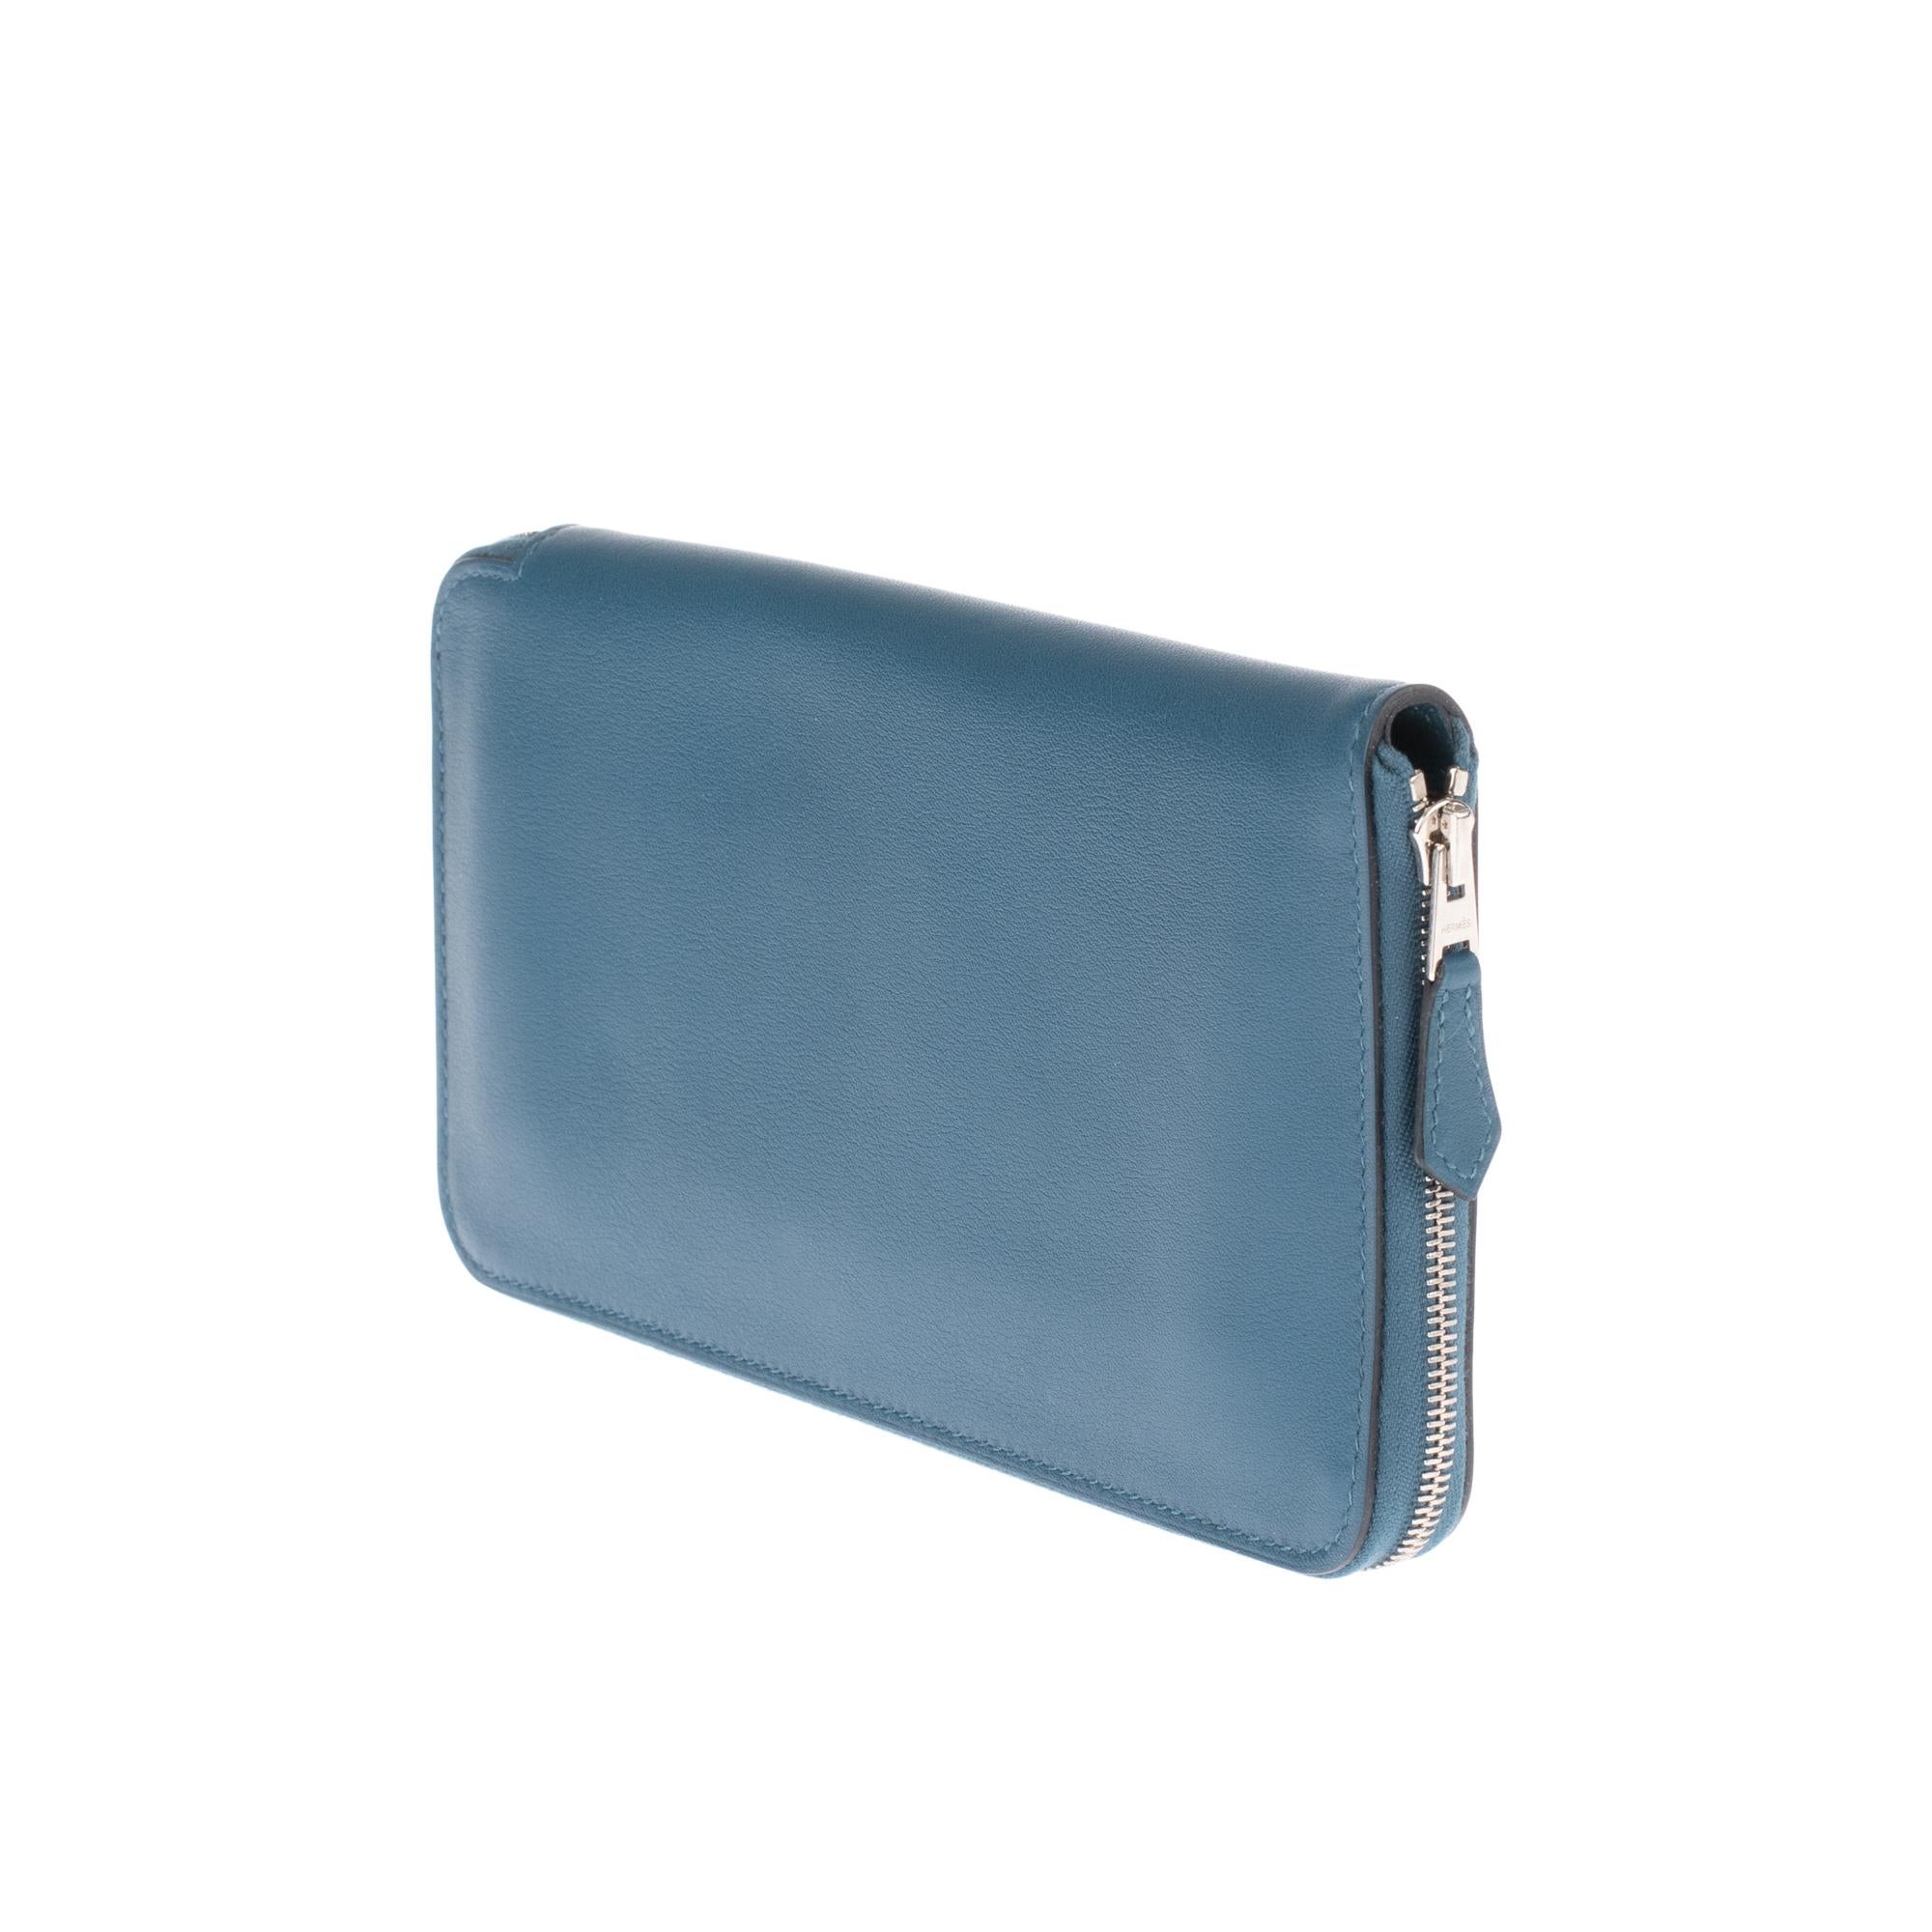 Blue Brand New - Hermès Azap Wallet in smooth blue leather with silver hardware !